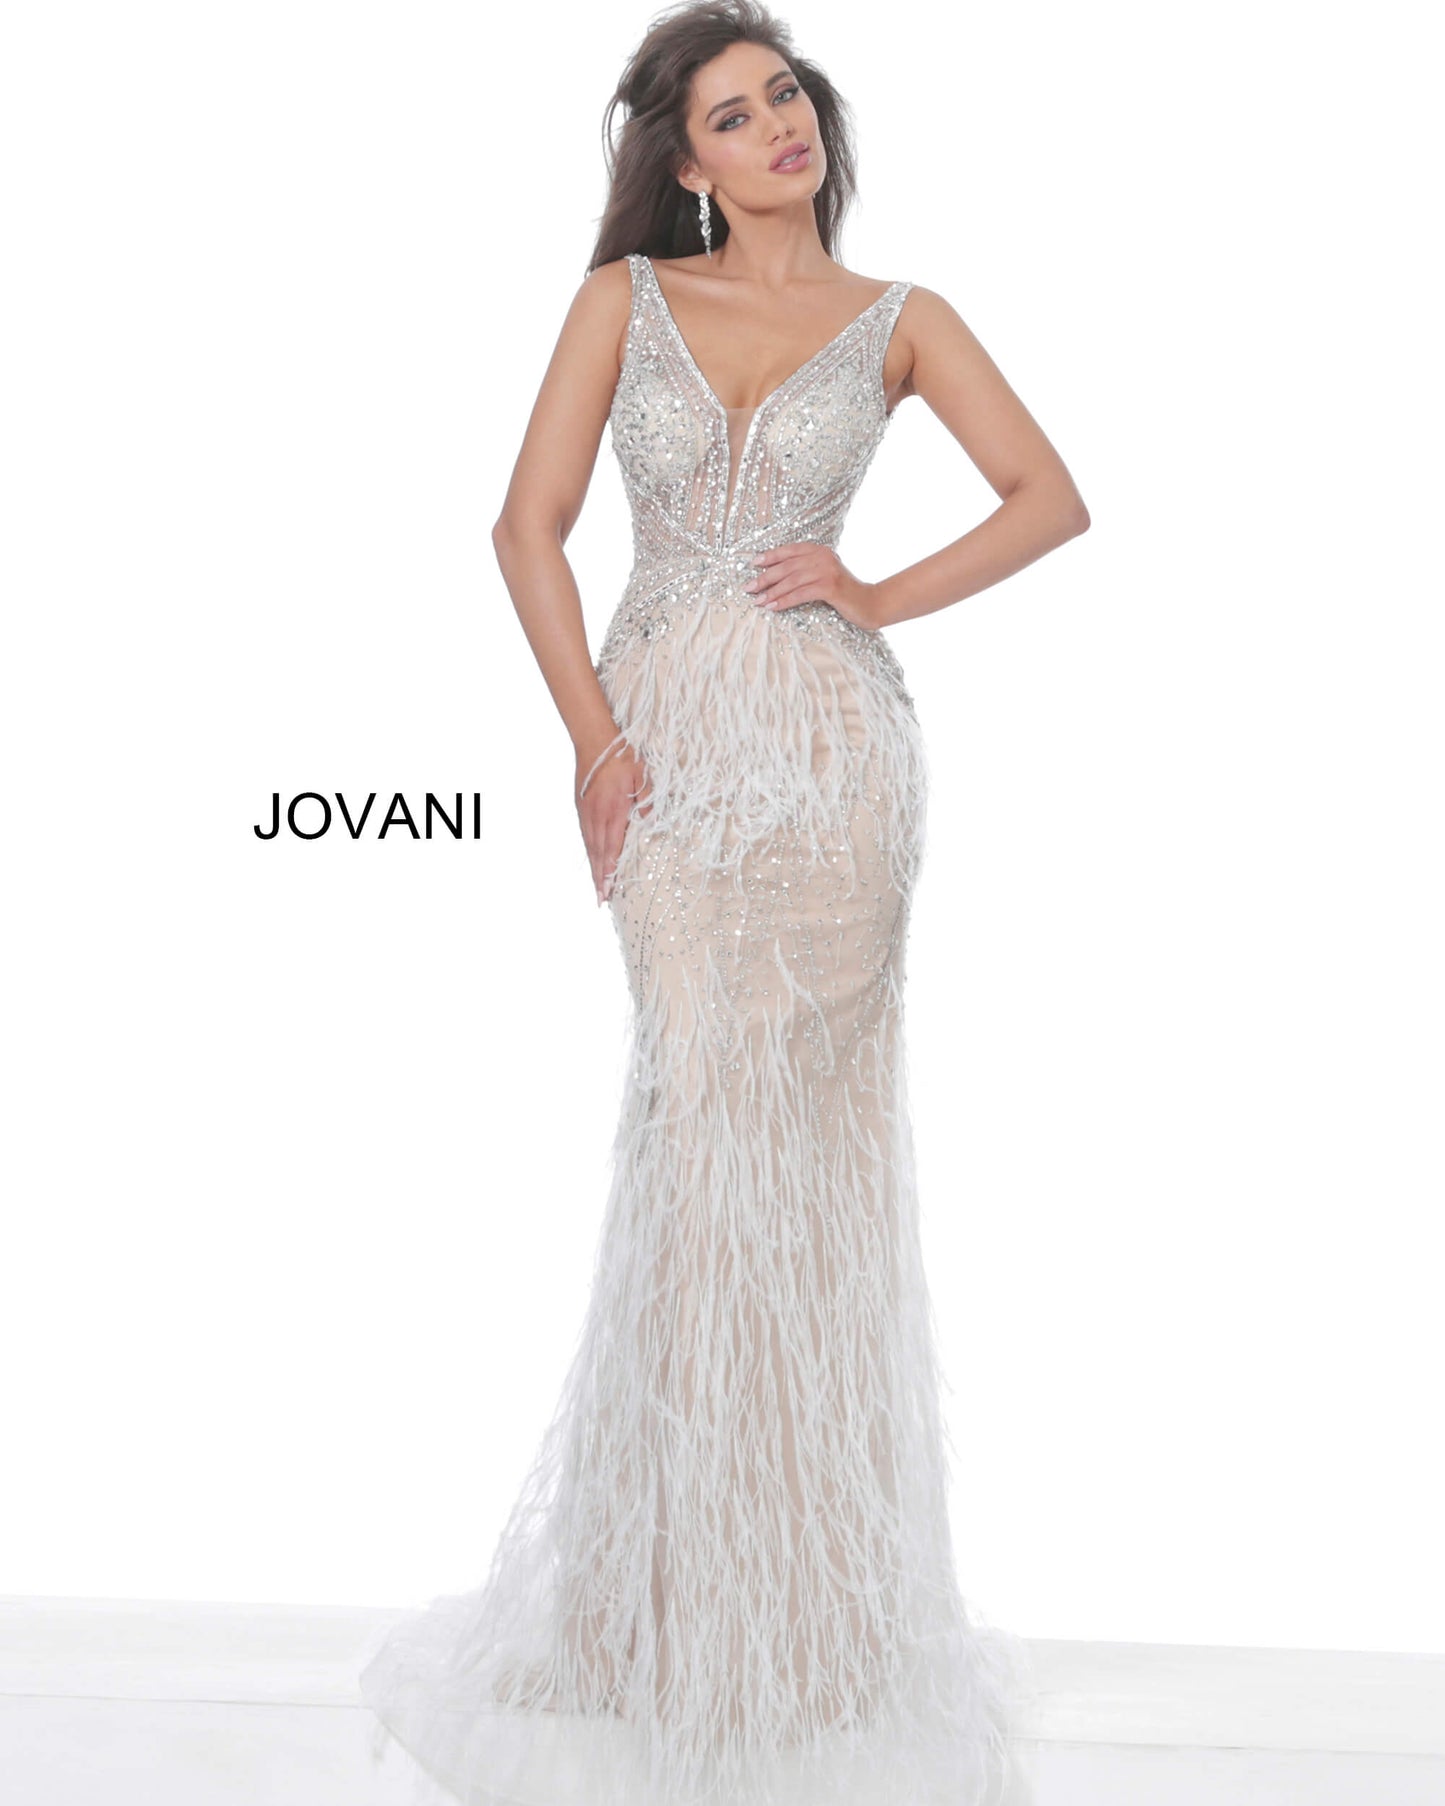 Jovani 03023 Sheer Feather Prom Dress Plunging Neckline Pageant Gown Embellished